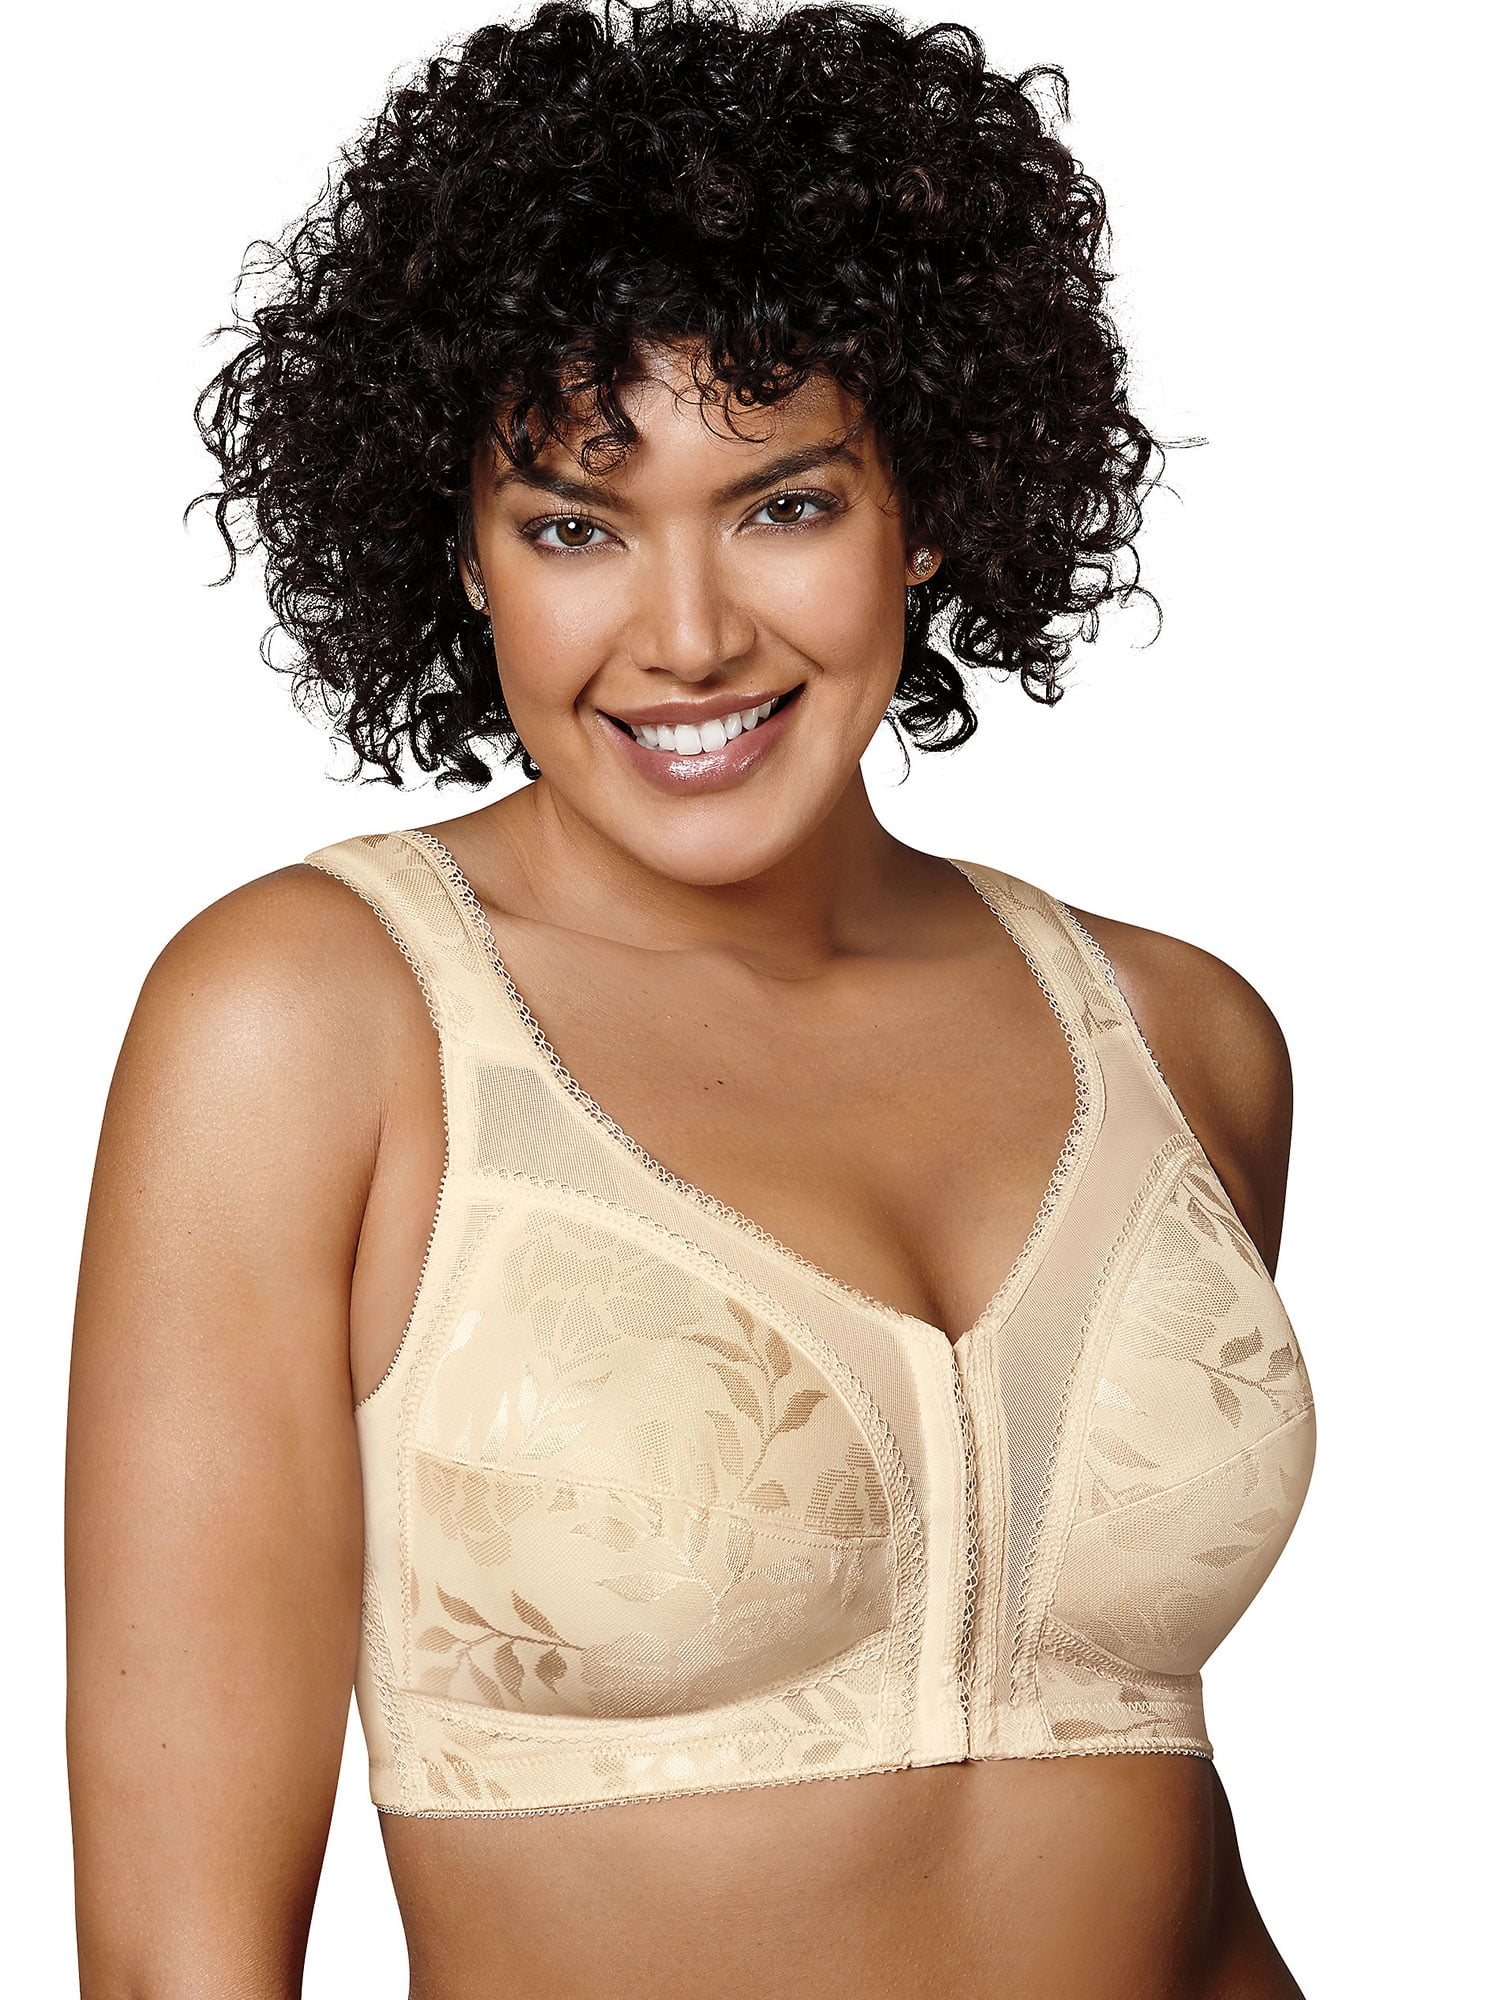 Playtex Women's Plus Size 18 Hour Front-Close Wireless Bra with Flex Back  4695-36 C, White